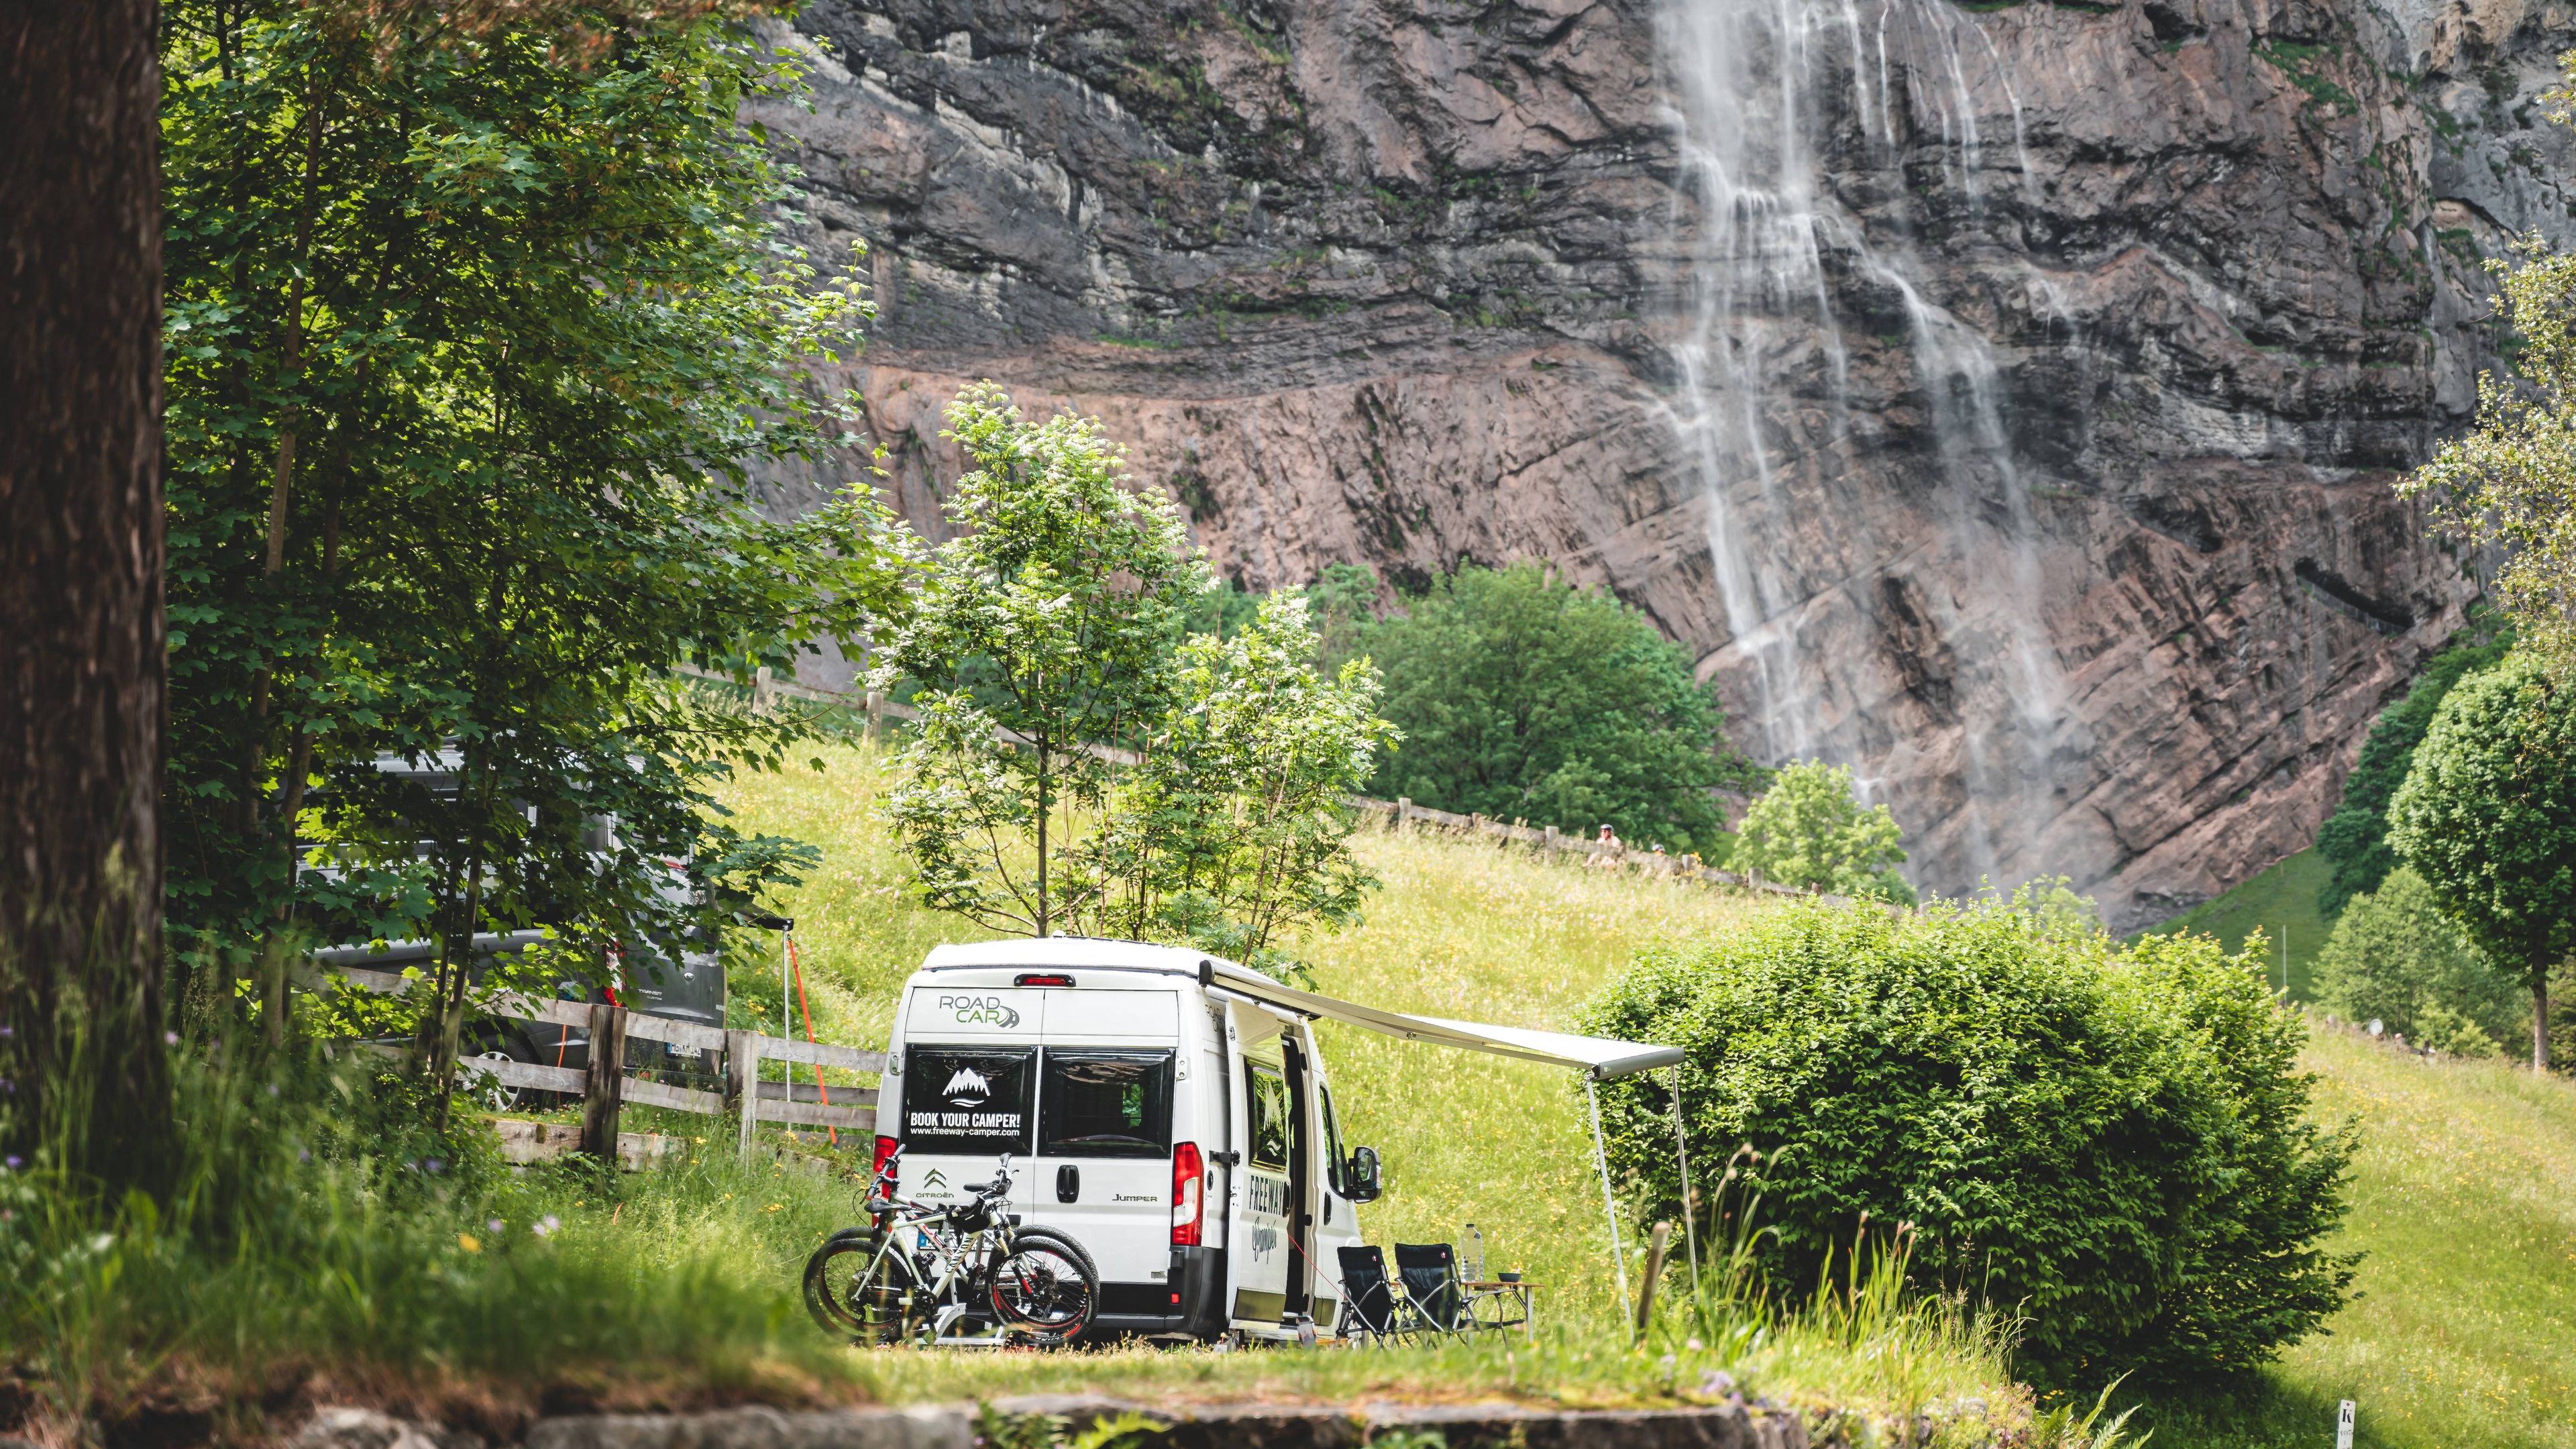 Camper in front of a waterfall